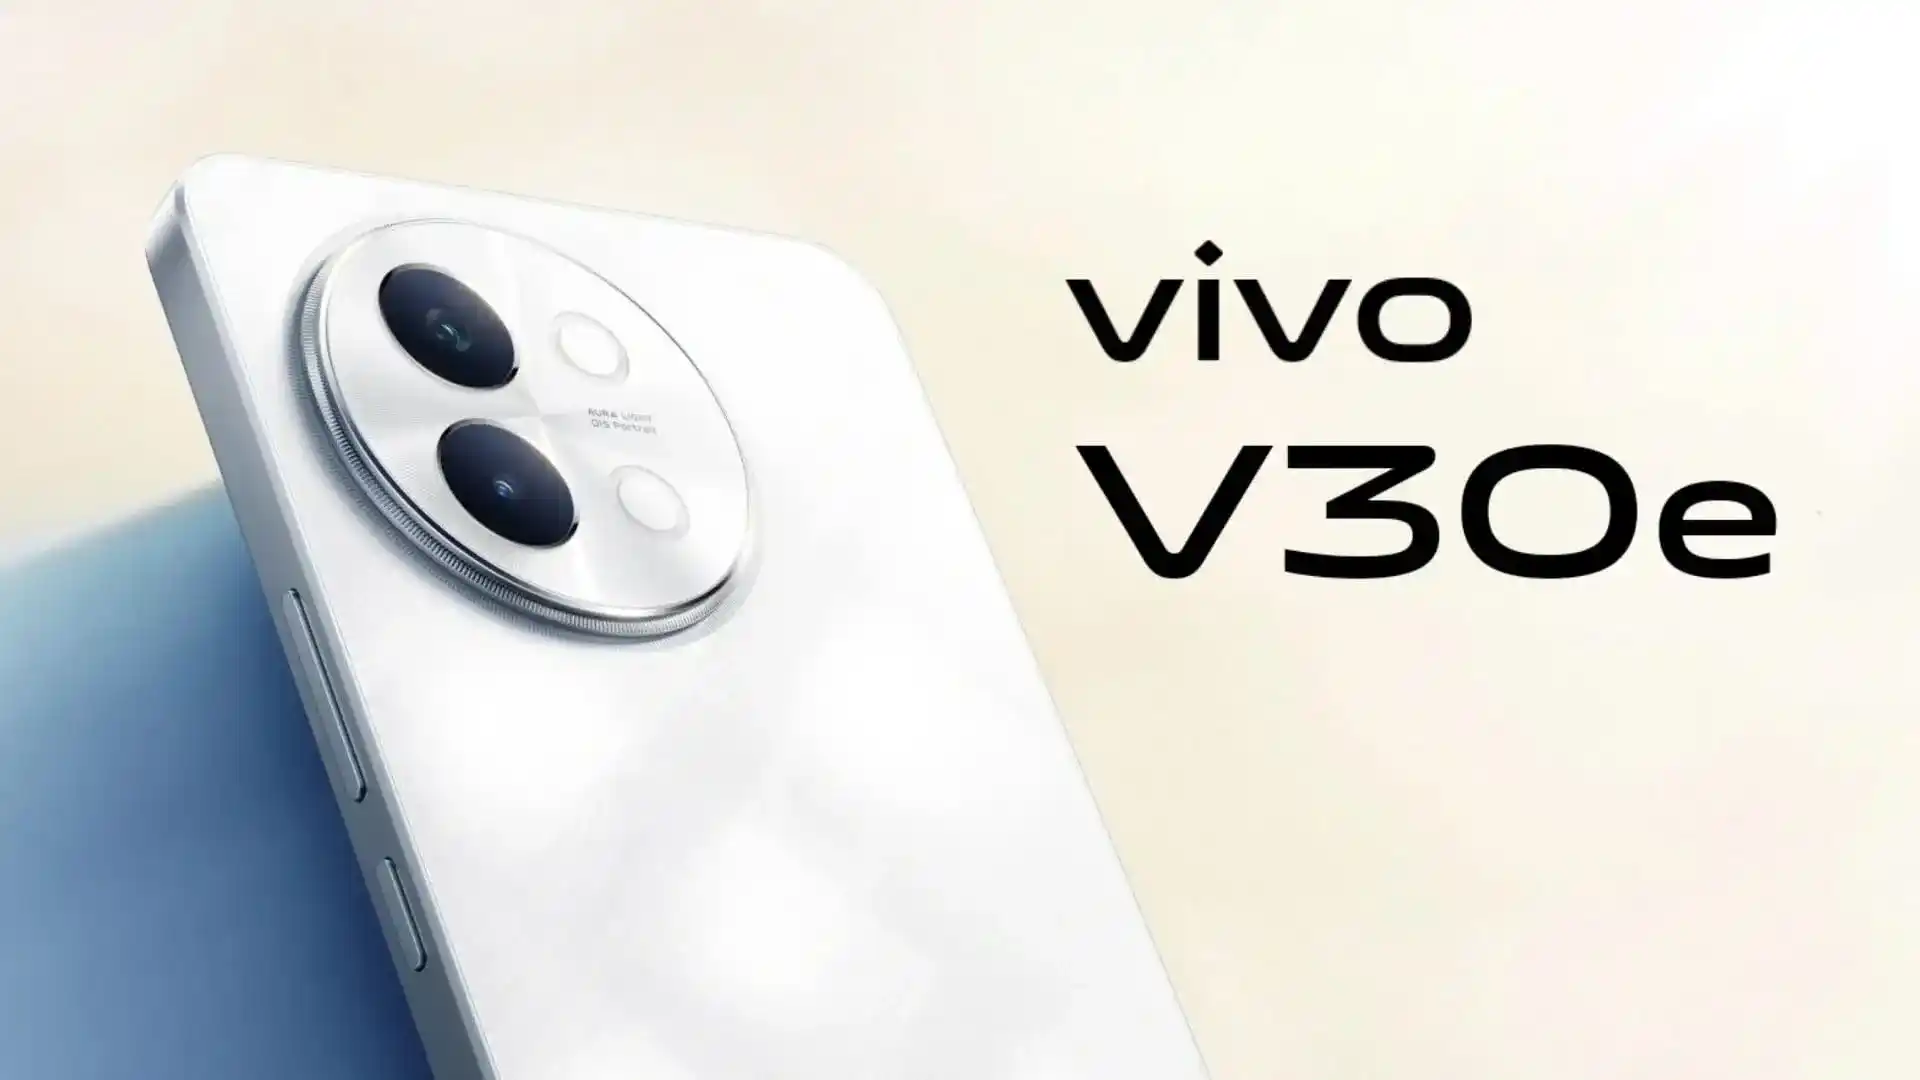 An insider has revealed the look and specs of the new Vivo V30e smartphone